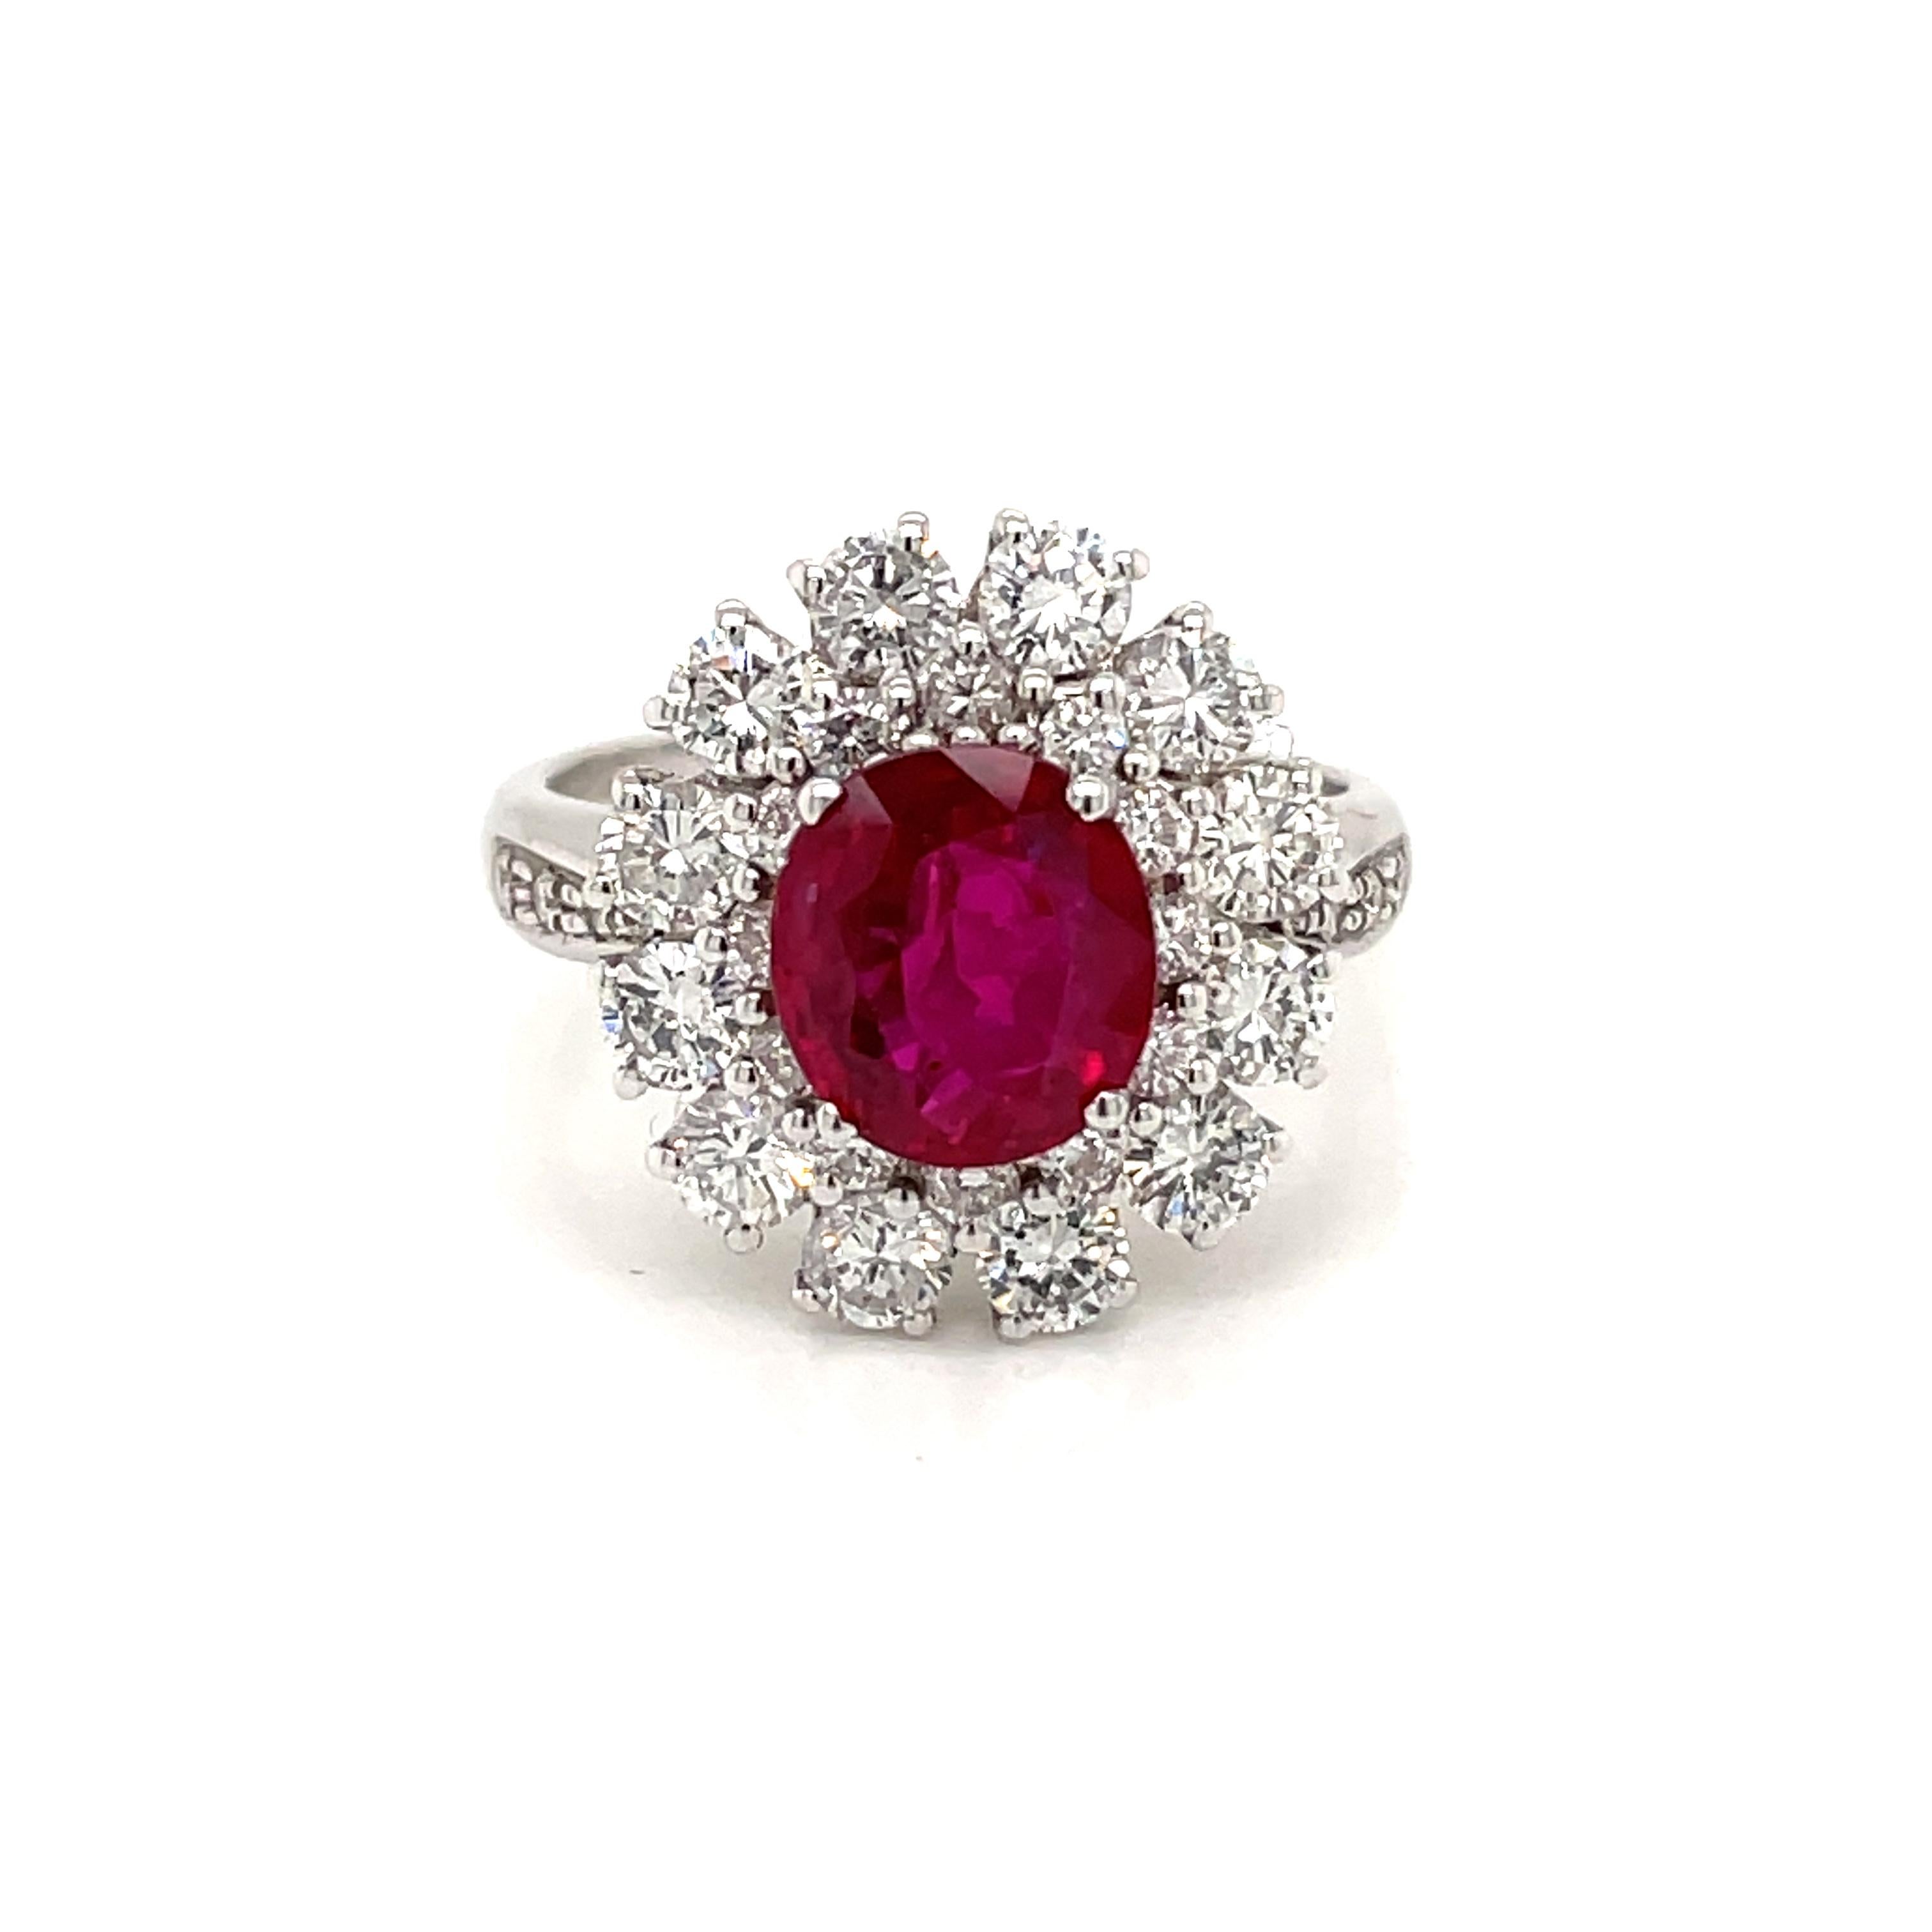 Exceptional 18k white Gold cluster ring features a 2.07 Carat oval-cut Ruby, surrounded by round brilliant cut Diamonds for a total approx. weight of 1.60 carats color H/I Vs clarity.

Ring Size: US 6 - IT 12 - FR 52 - UK M
This ring may be